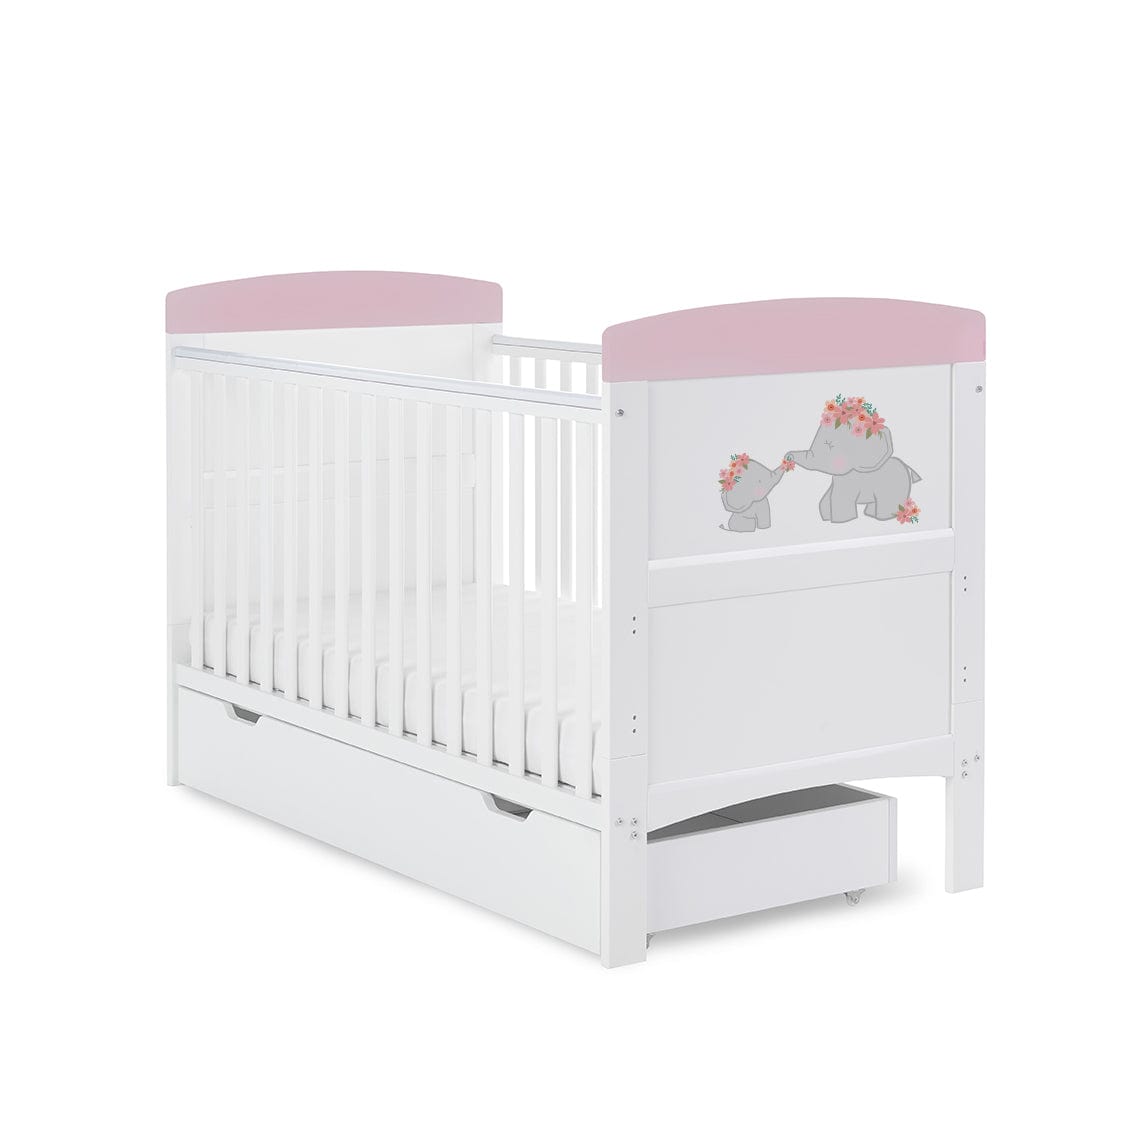 Obaby Cot & Cot Bed Cot Bed & Under Drawer OBABY Grace Inspire Cot Bed - Me & Mini Me Elephants - Pink